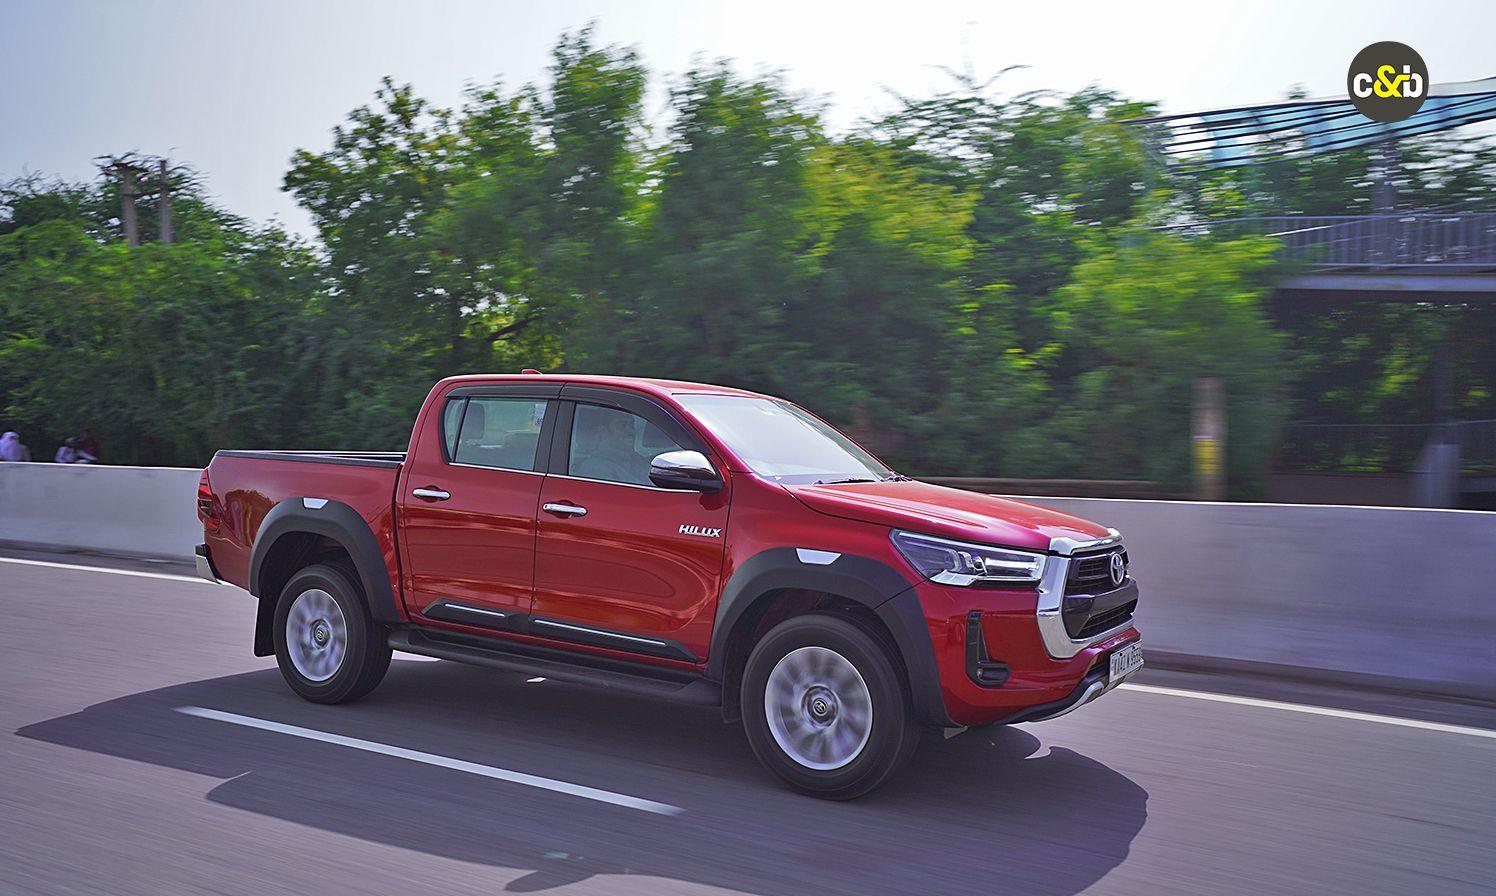 We had the Toyota Hilux pickup truck with us for a few days and we put it to test, like how it would be used on a daily basis and we had some interesting observations. Read on to find out how the Hilux fares as a daily driver. 